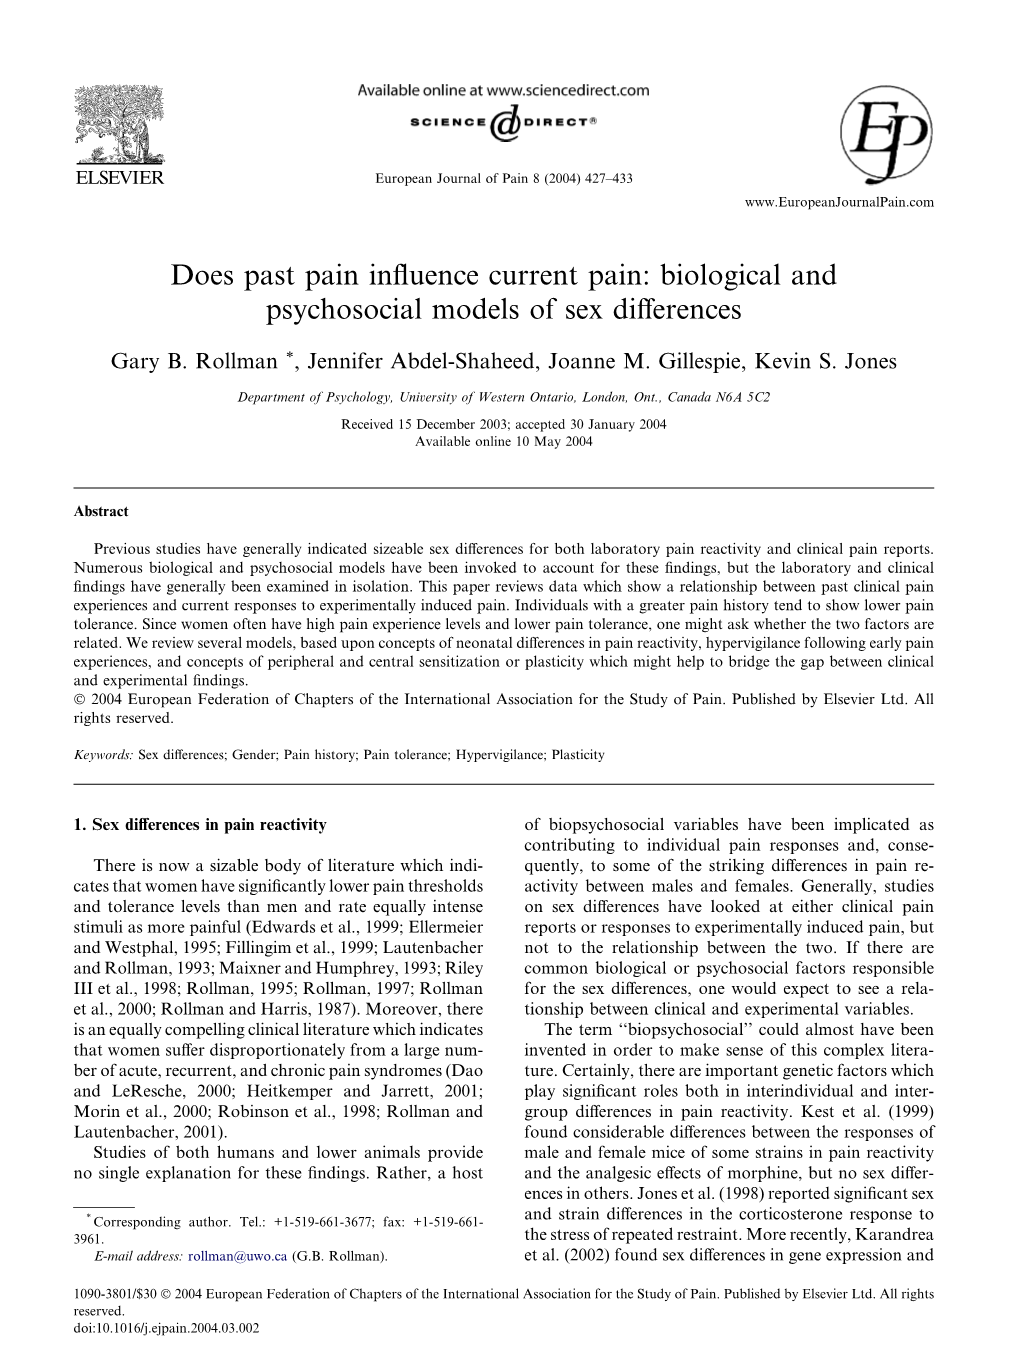 Does Past Pain Influence Current Pain: Biological and Psychosocial Models of Sex Differences